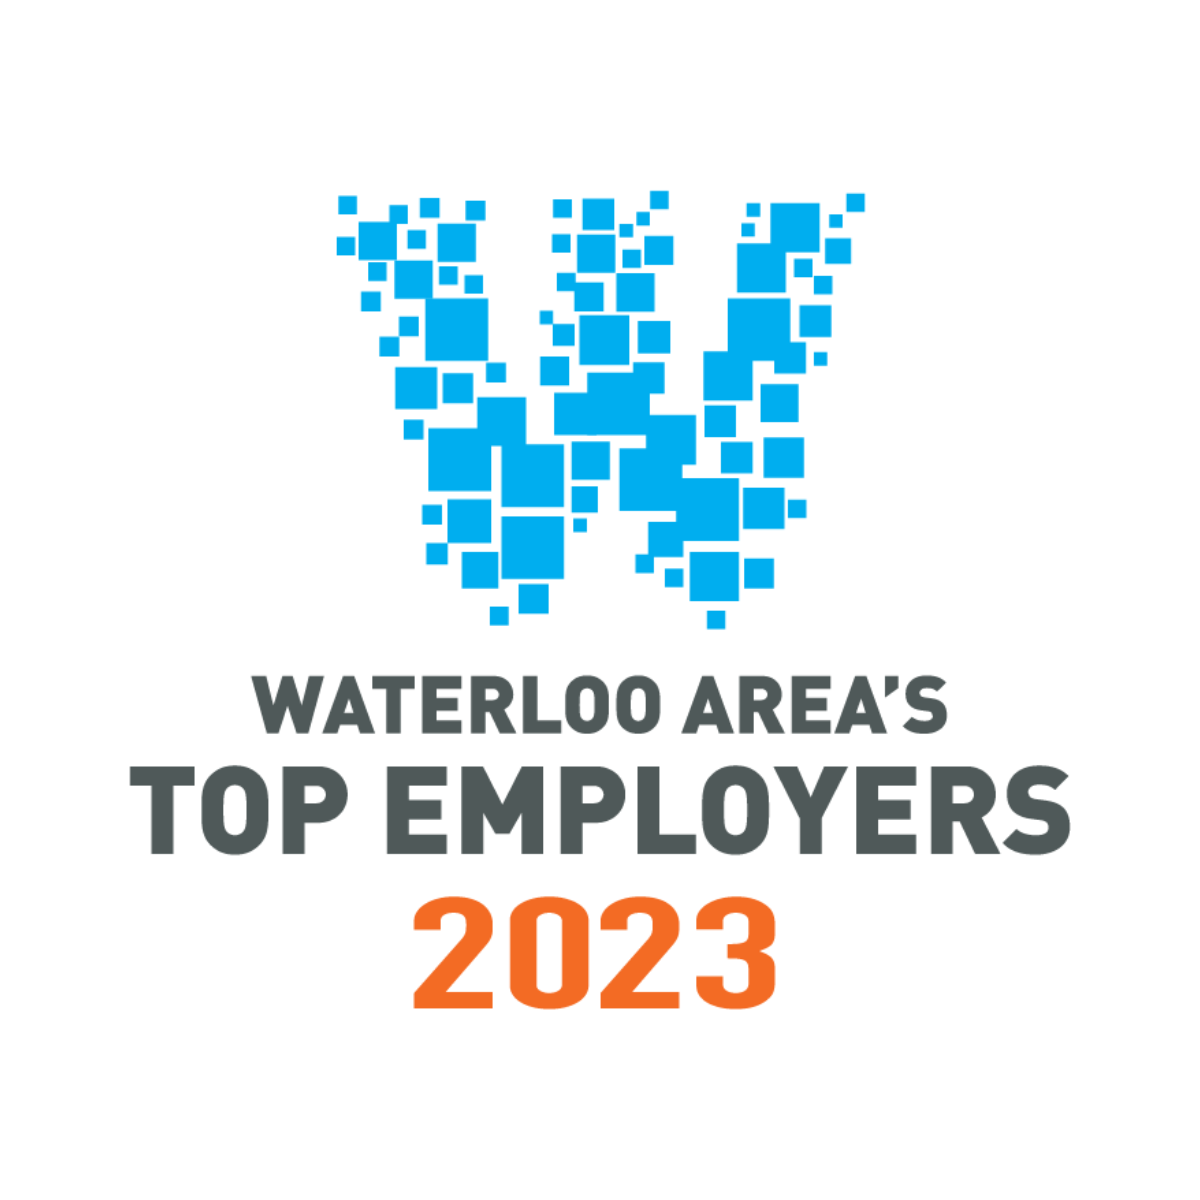 WalterFedy Recognized as a Waterloo Area Top Employer